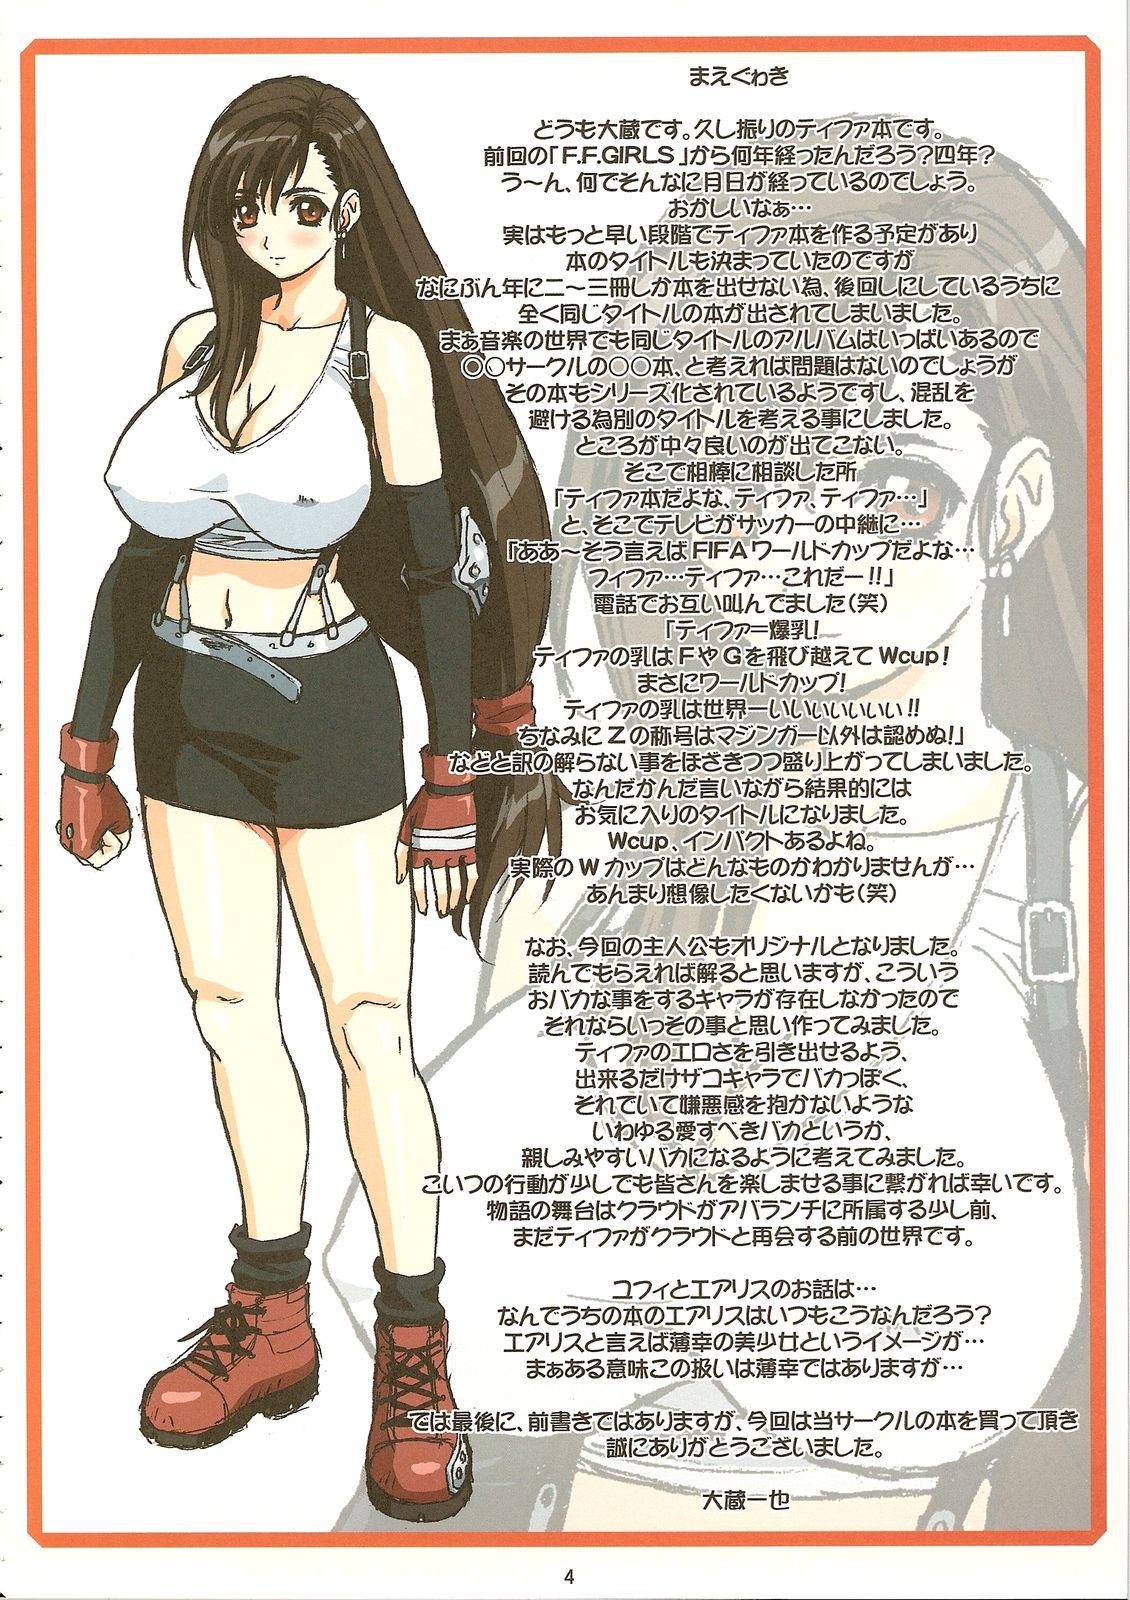 Babe Tifa W cup - Final fantasy vii Hunks - Page 3